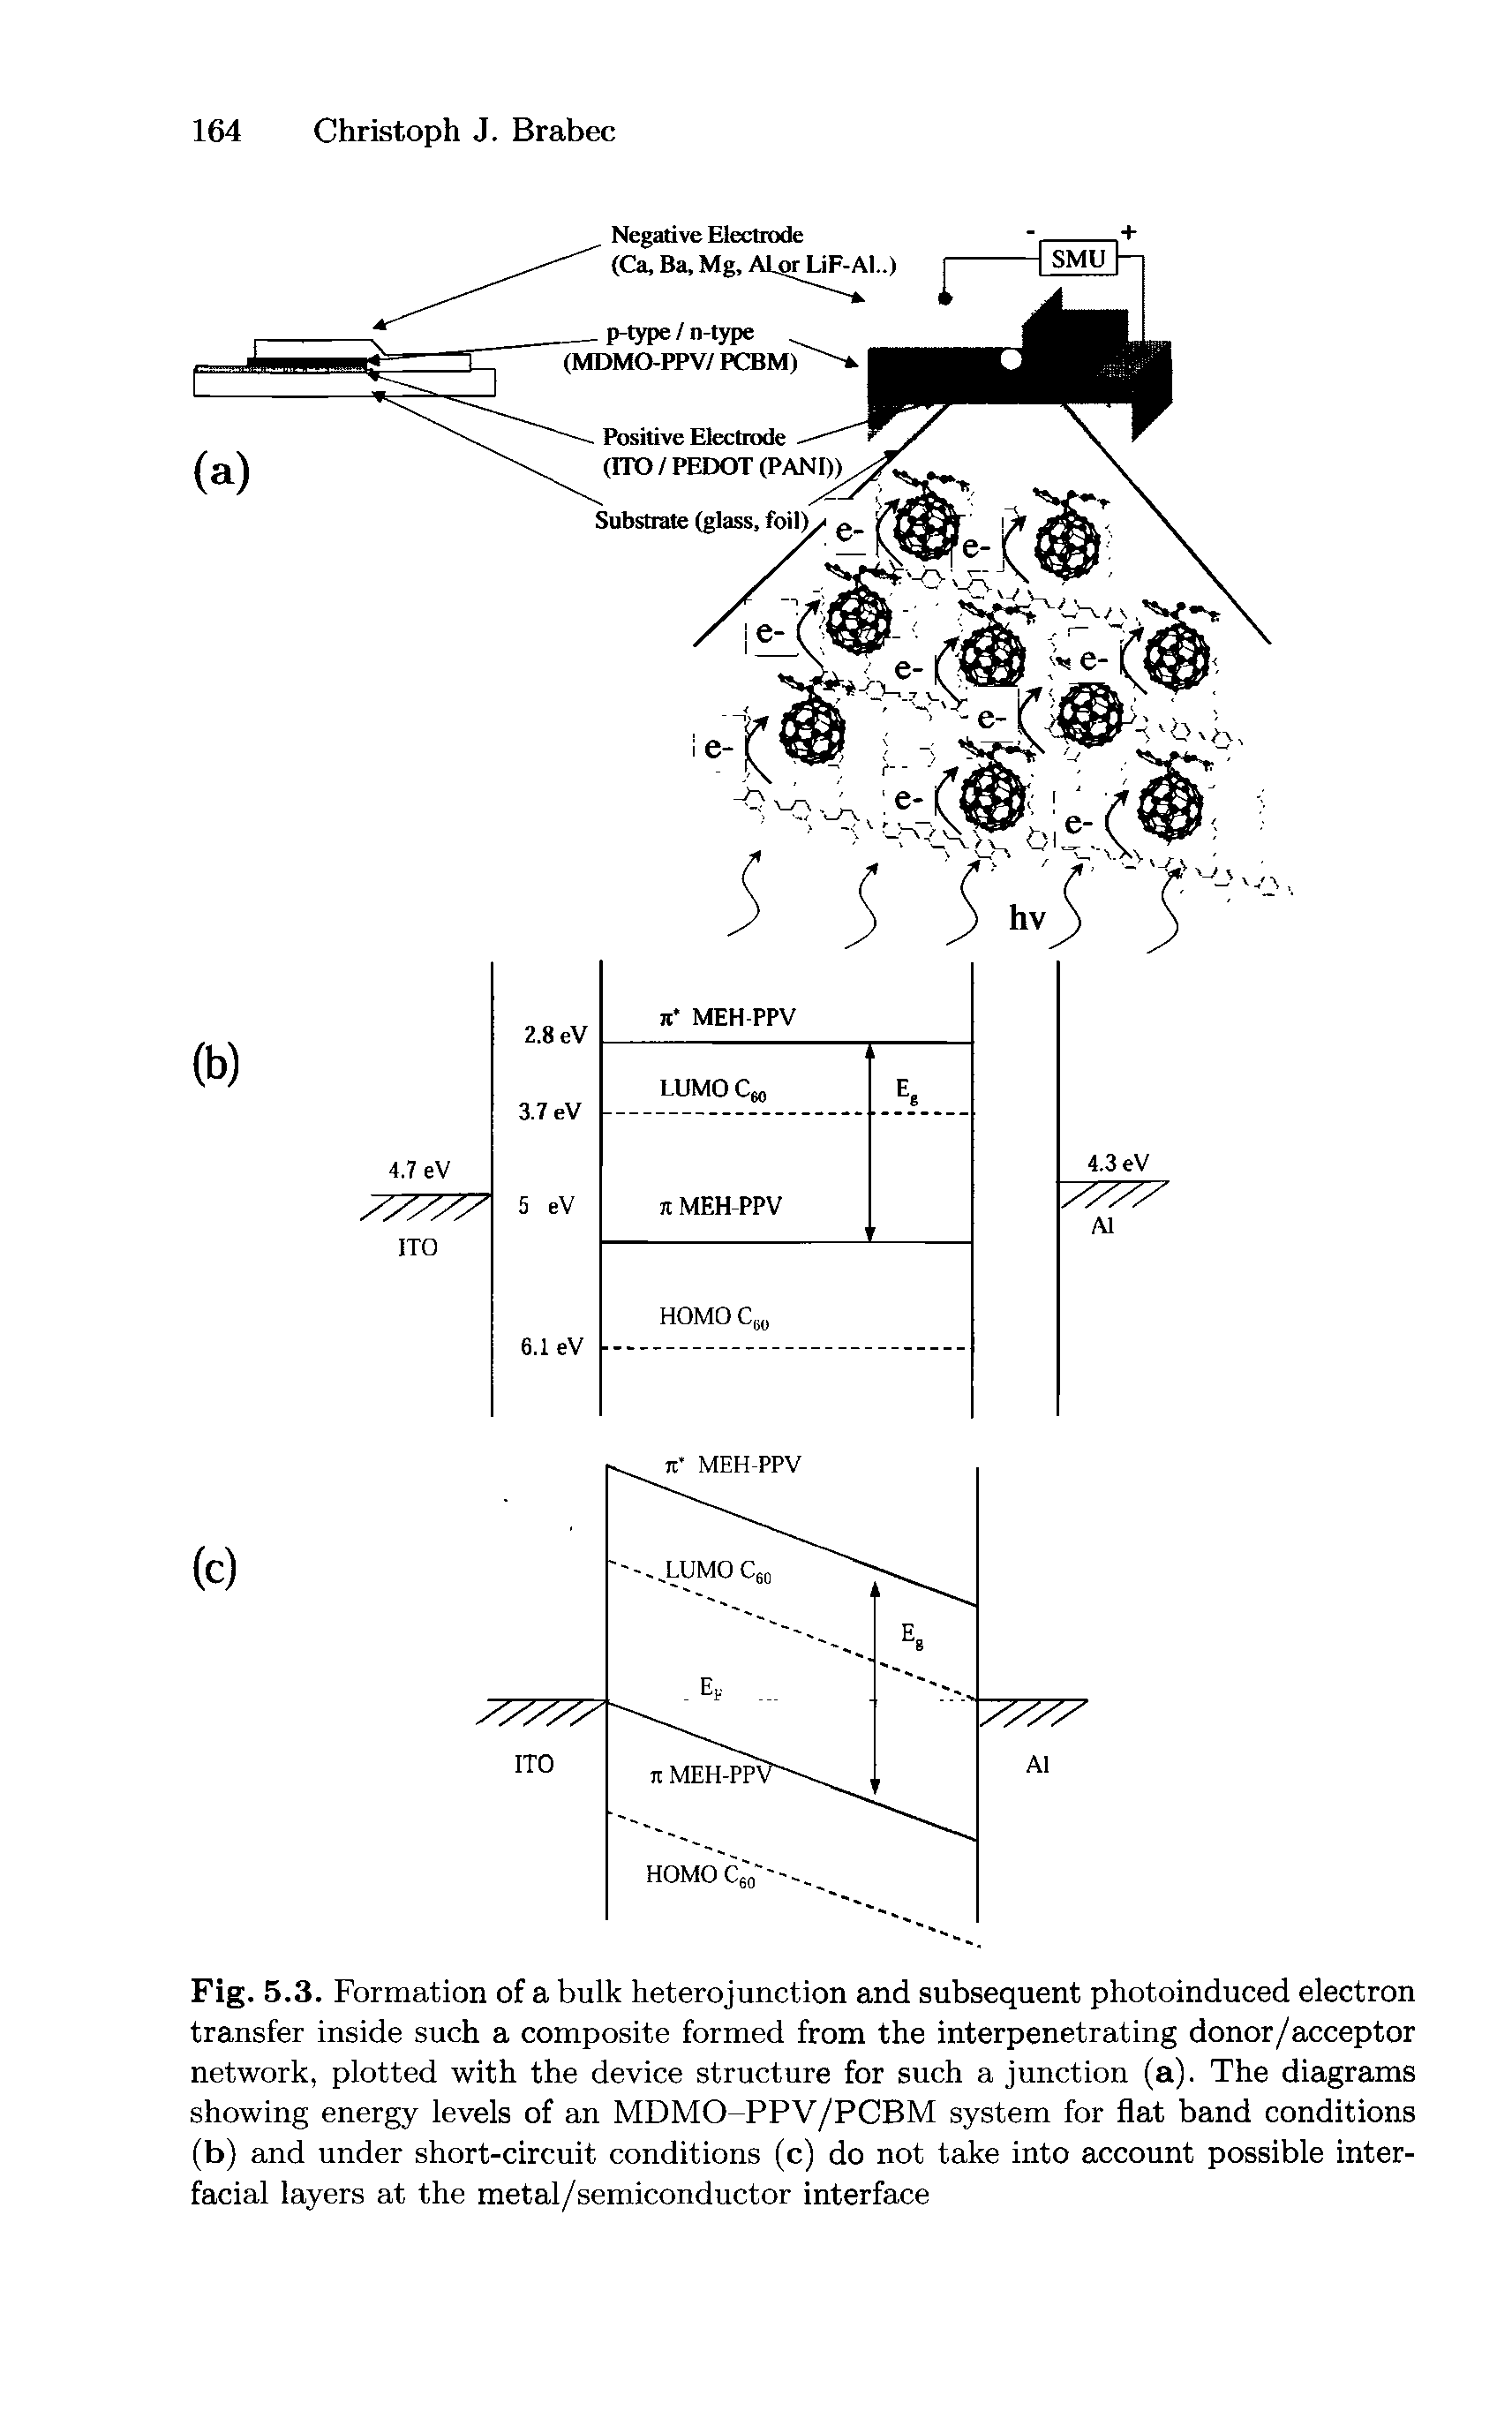 Fig. 5.3. Formation of a bulk heterojunction and subsequent photoinduced electron transfer inside such a composite formed from the interpenetrating donor/acceptor network, plotted with the device structure for such a junction (a). The diagrams showing energy levels of an MDMO-PPV/PCBM system for flat band conditions (b) and under short-circuit conditions (c) do not take into account possible interfacial layers at the metal/semiconductor interface...